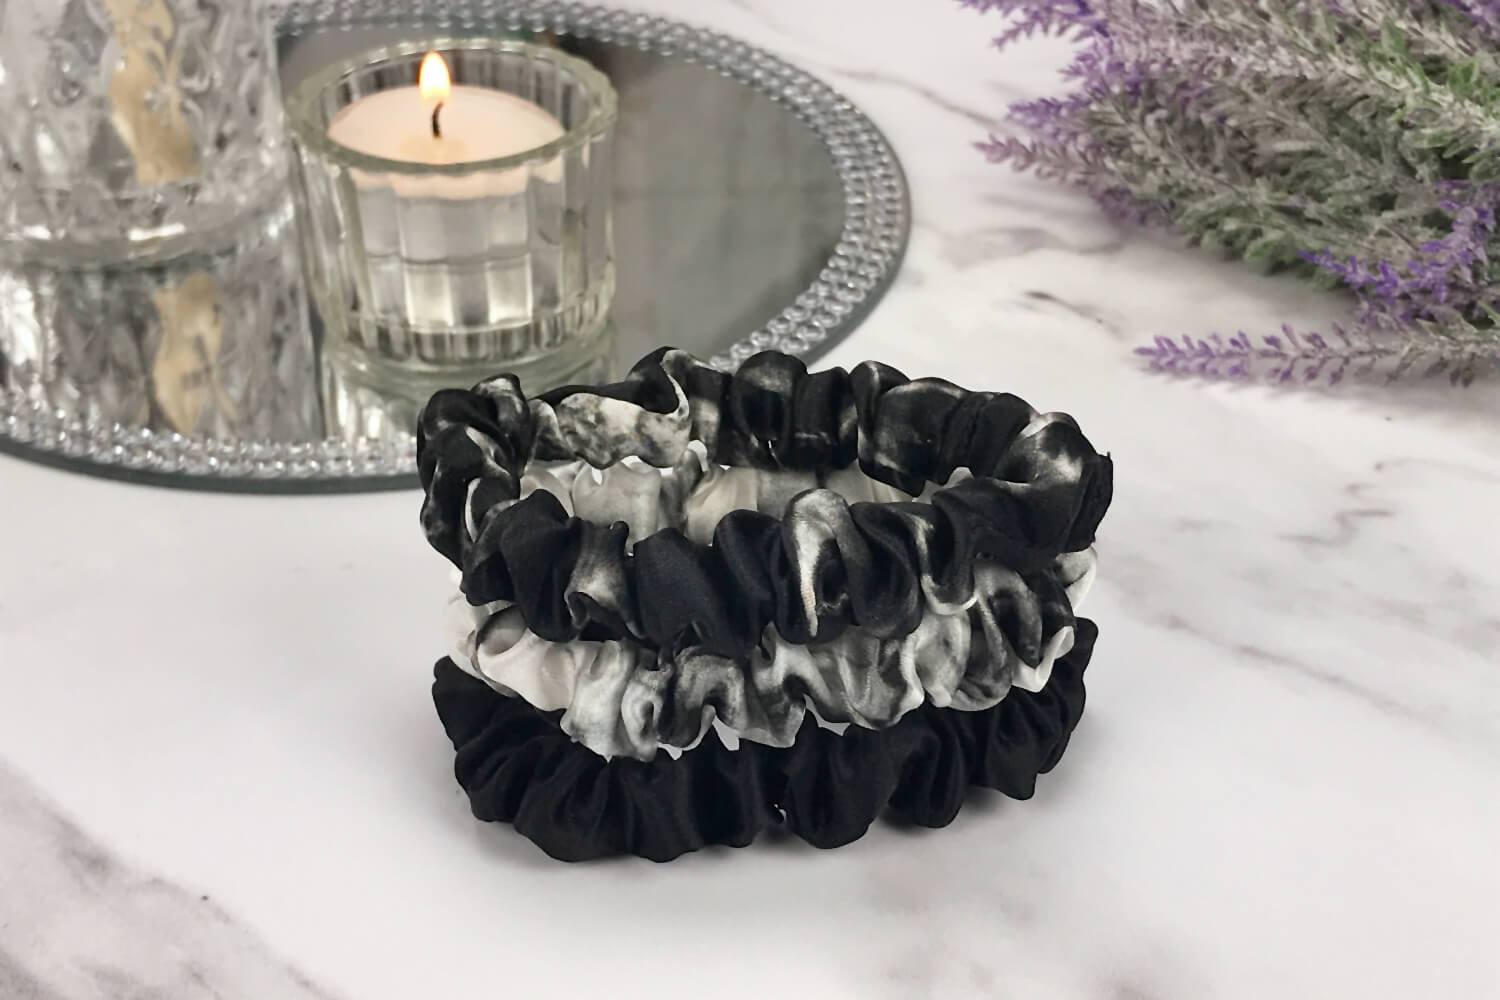 Celestial Silk skinny white marble black marble and black silk scrunchies stacked on marble counter with lavender plant and a candle in the background